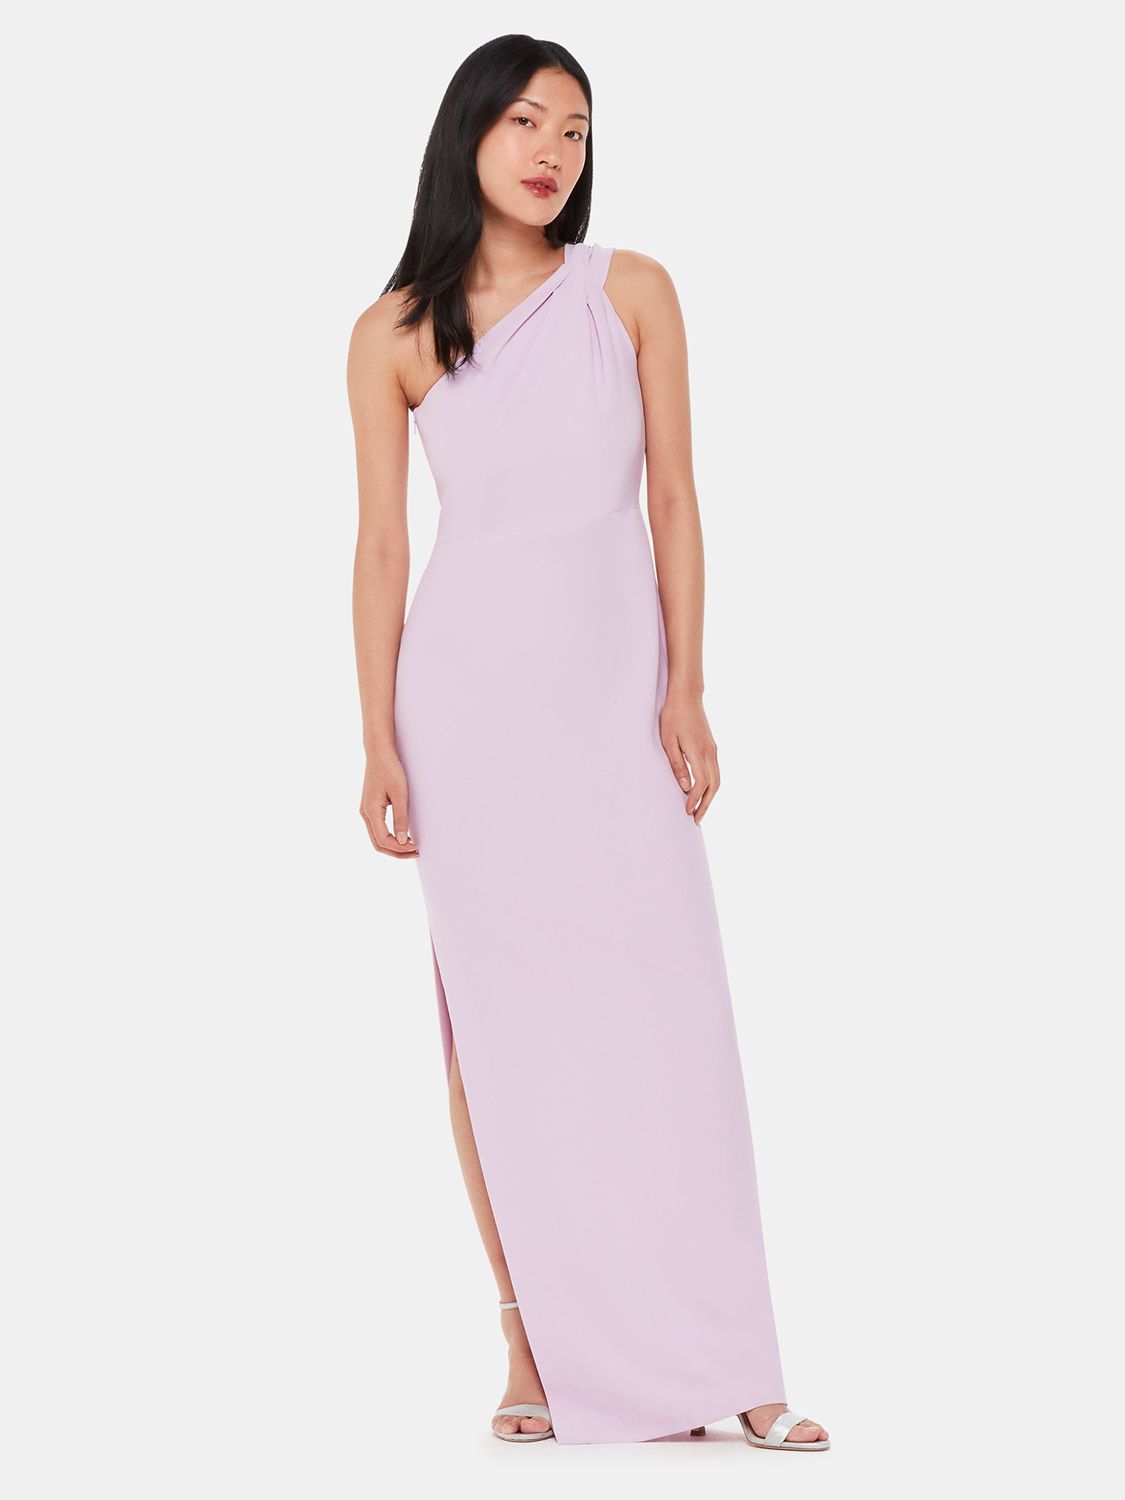 Whistles Bethan One Shoulder Maxi Dress, Lilac, 6